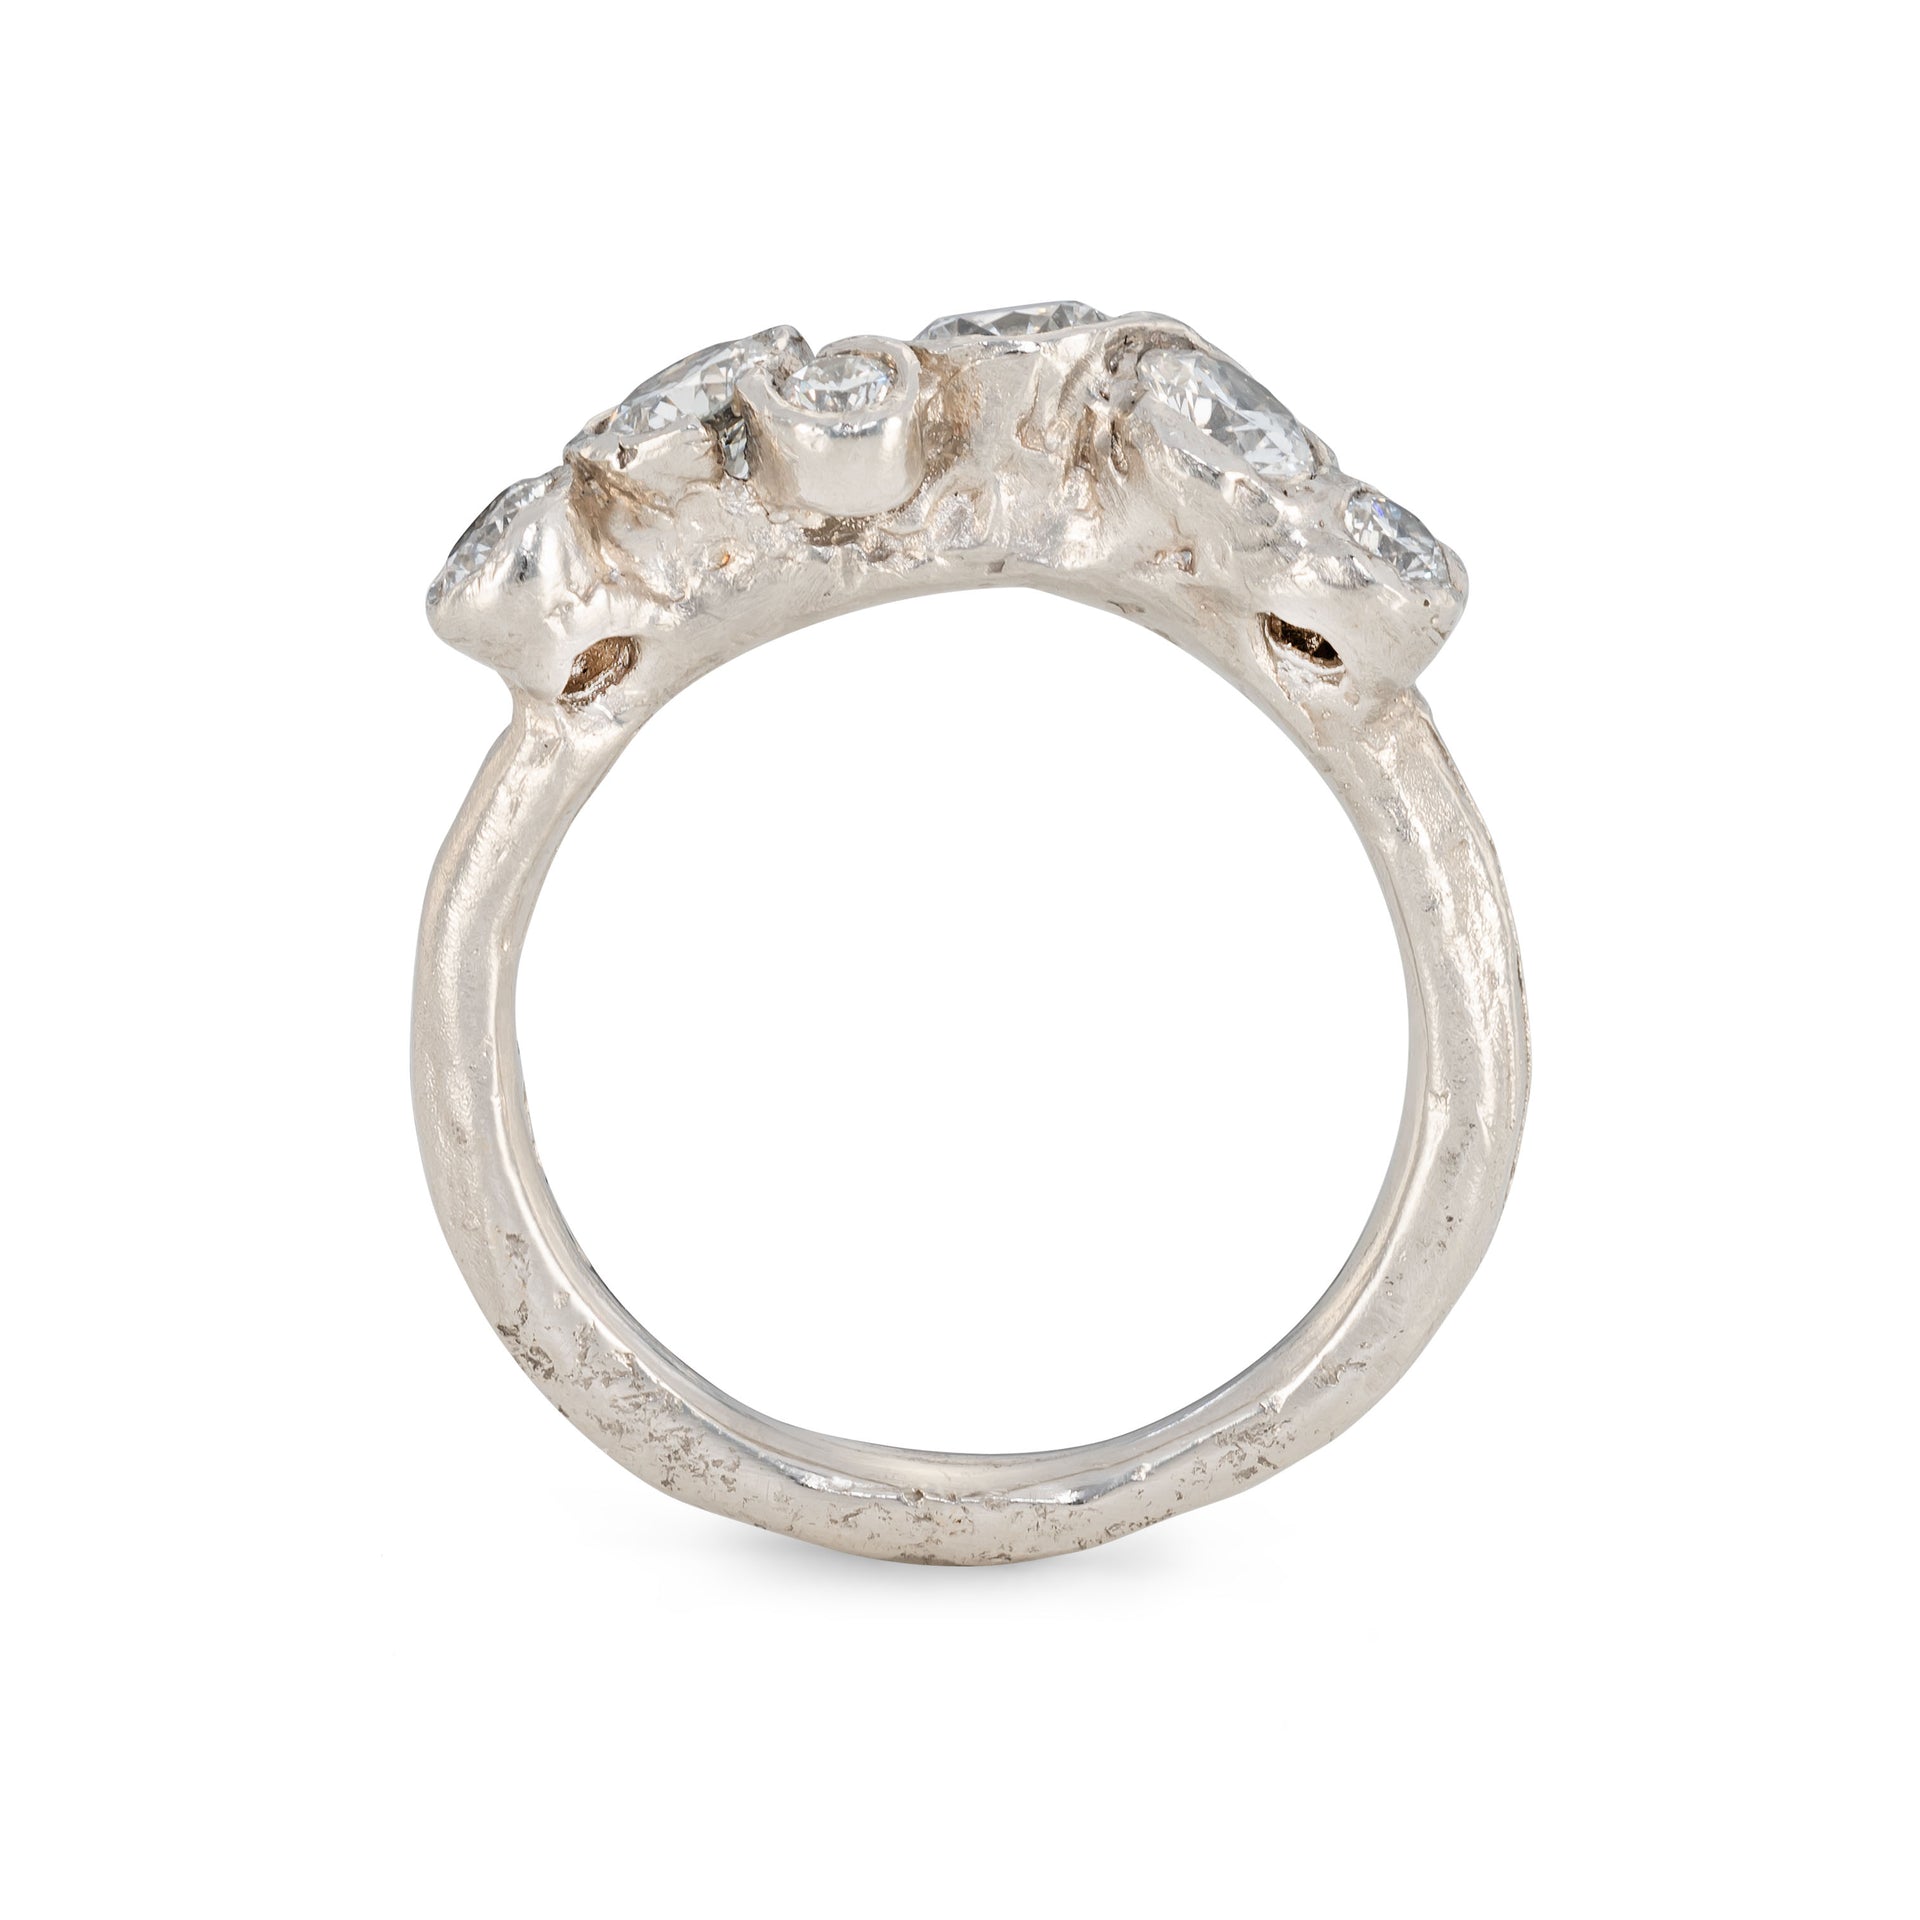 Side profile of a unique, alternative Emily Nixon engagement ring, made in Cornwall.